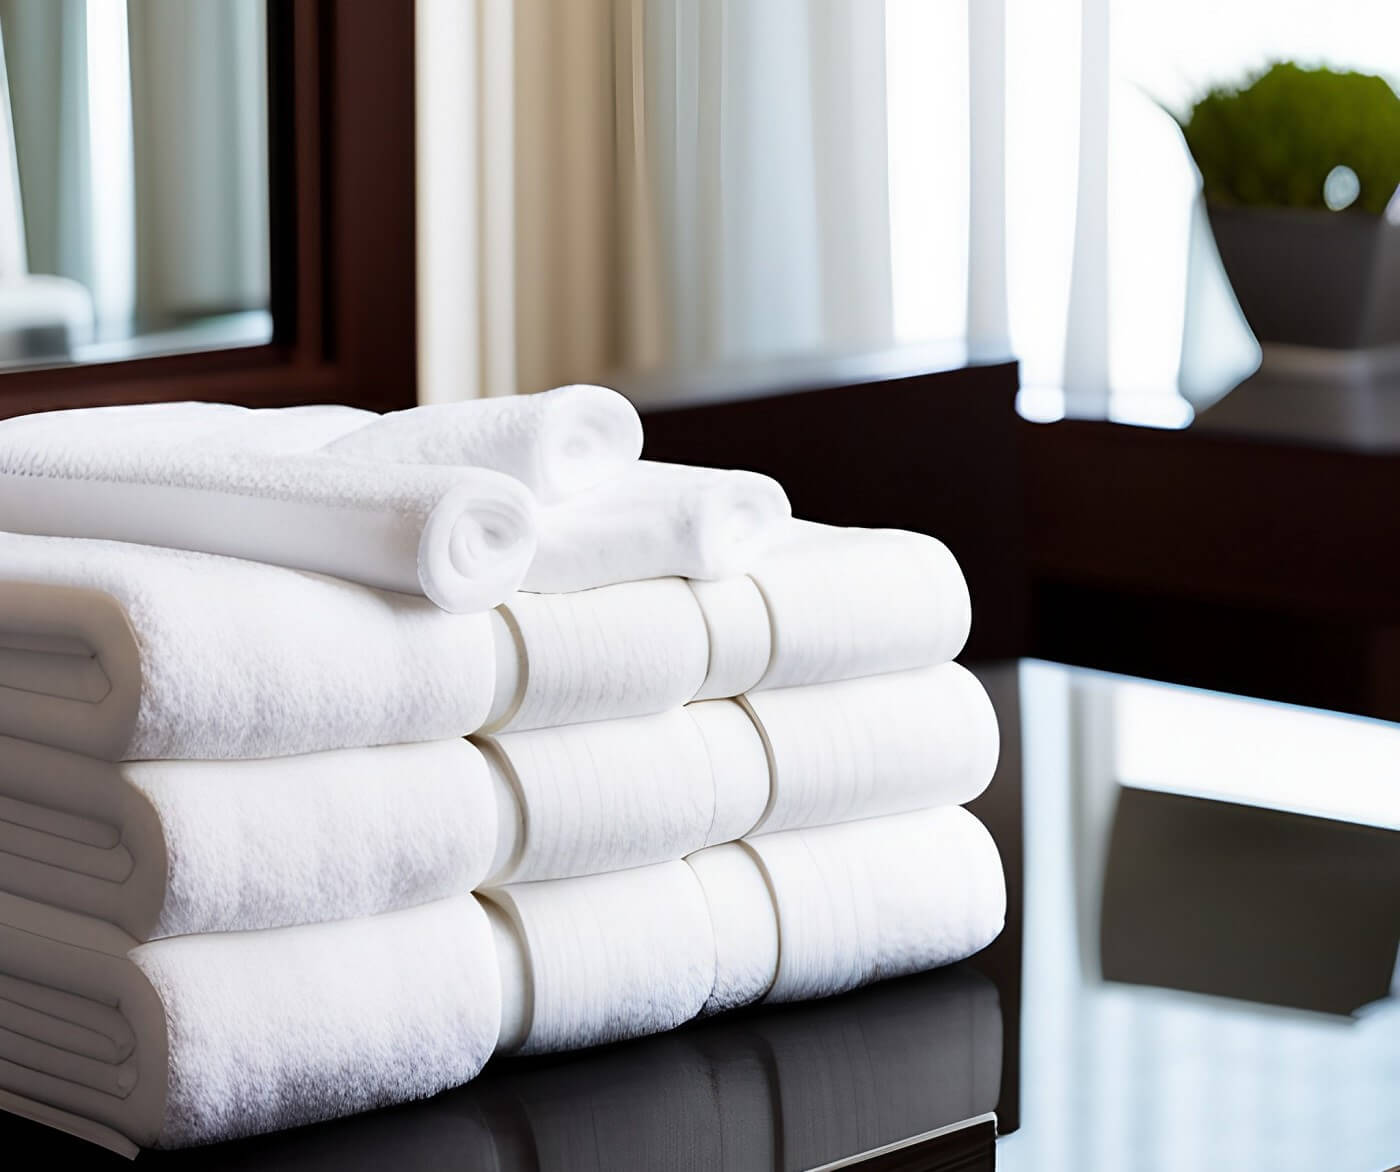 Characteristics of the Best Wholesale Towels